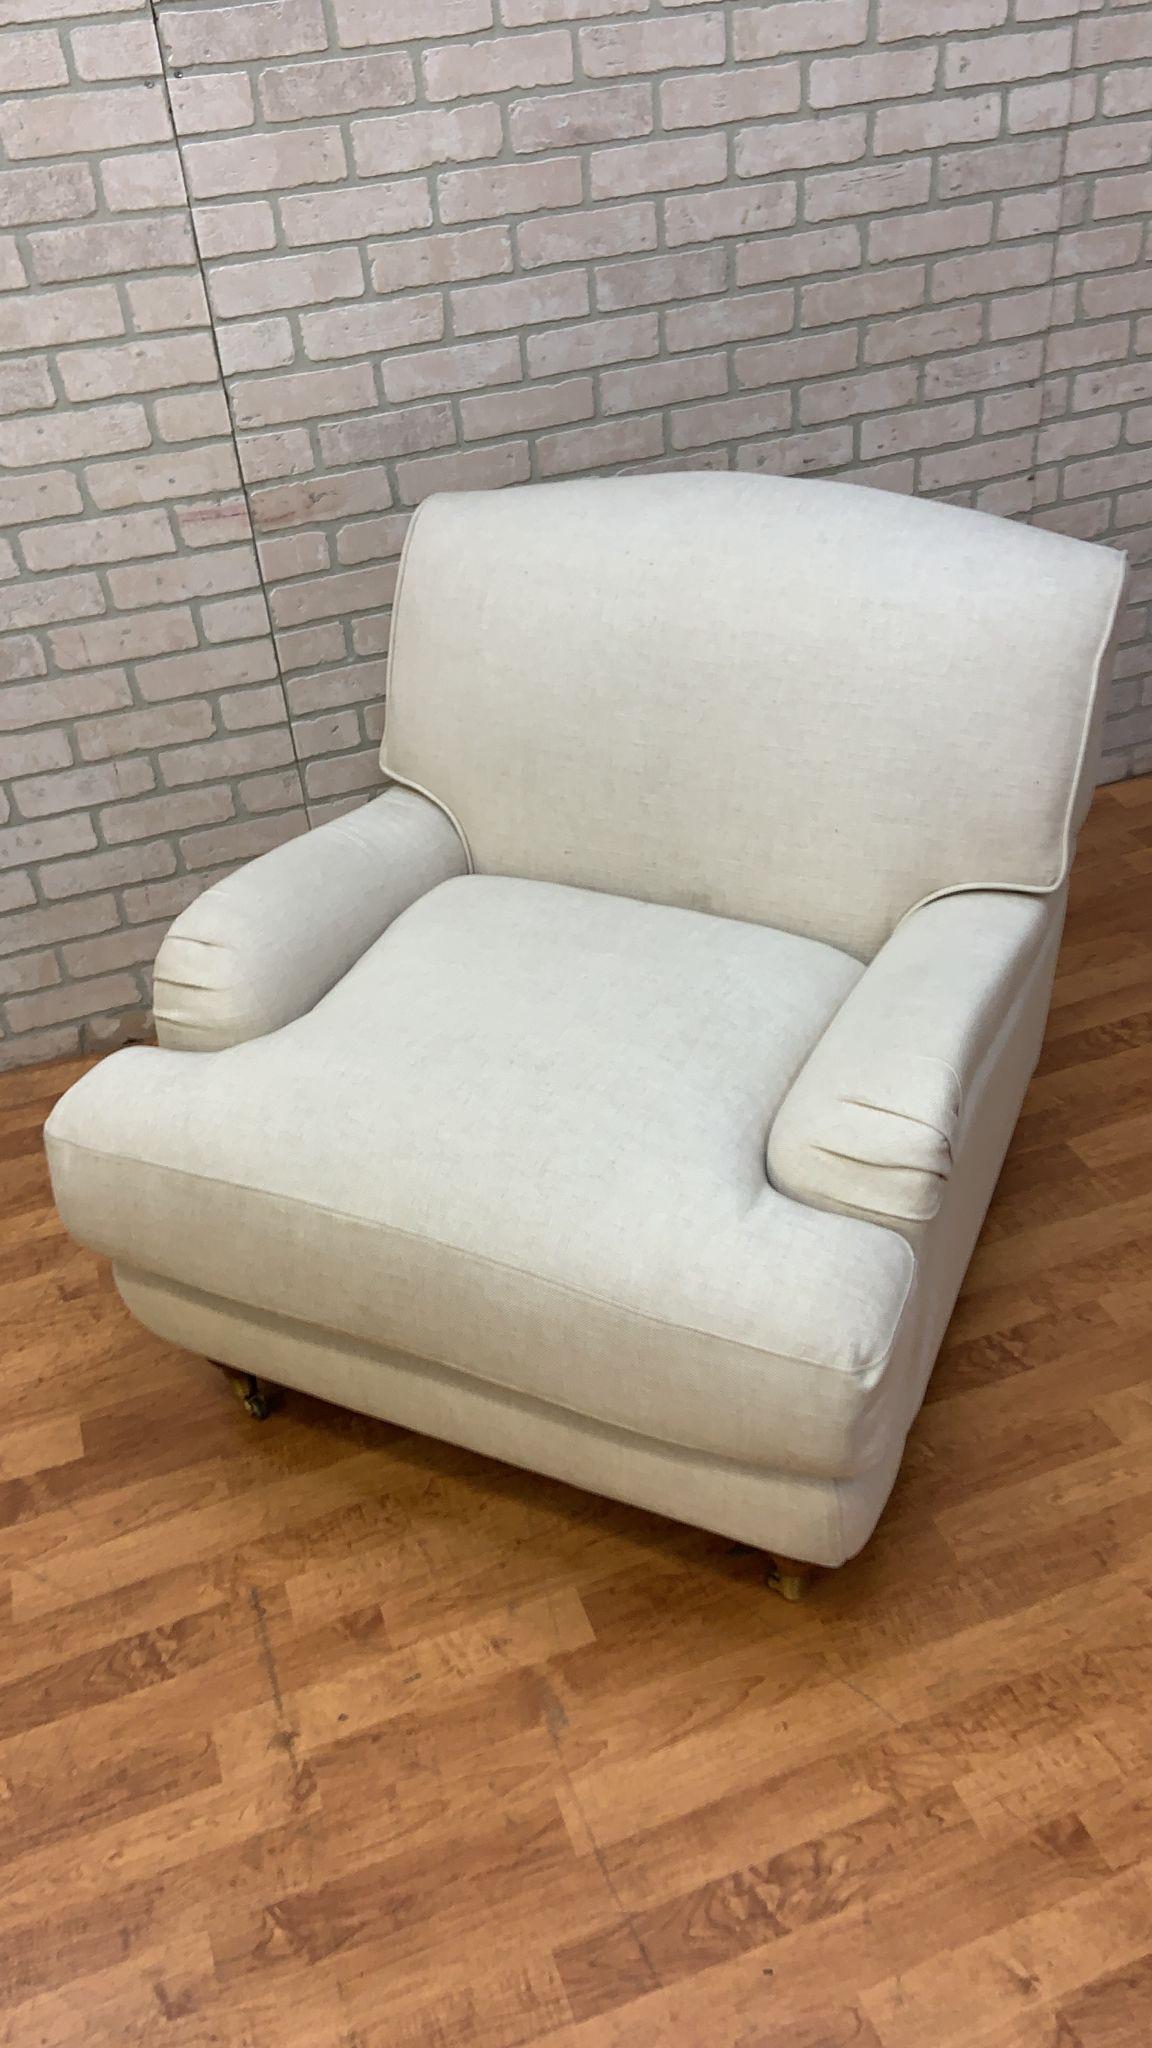 Hand-Crafted Vintage Rolled Arm Sydney Club Chair Upholstered in Cream Linen For Sale